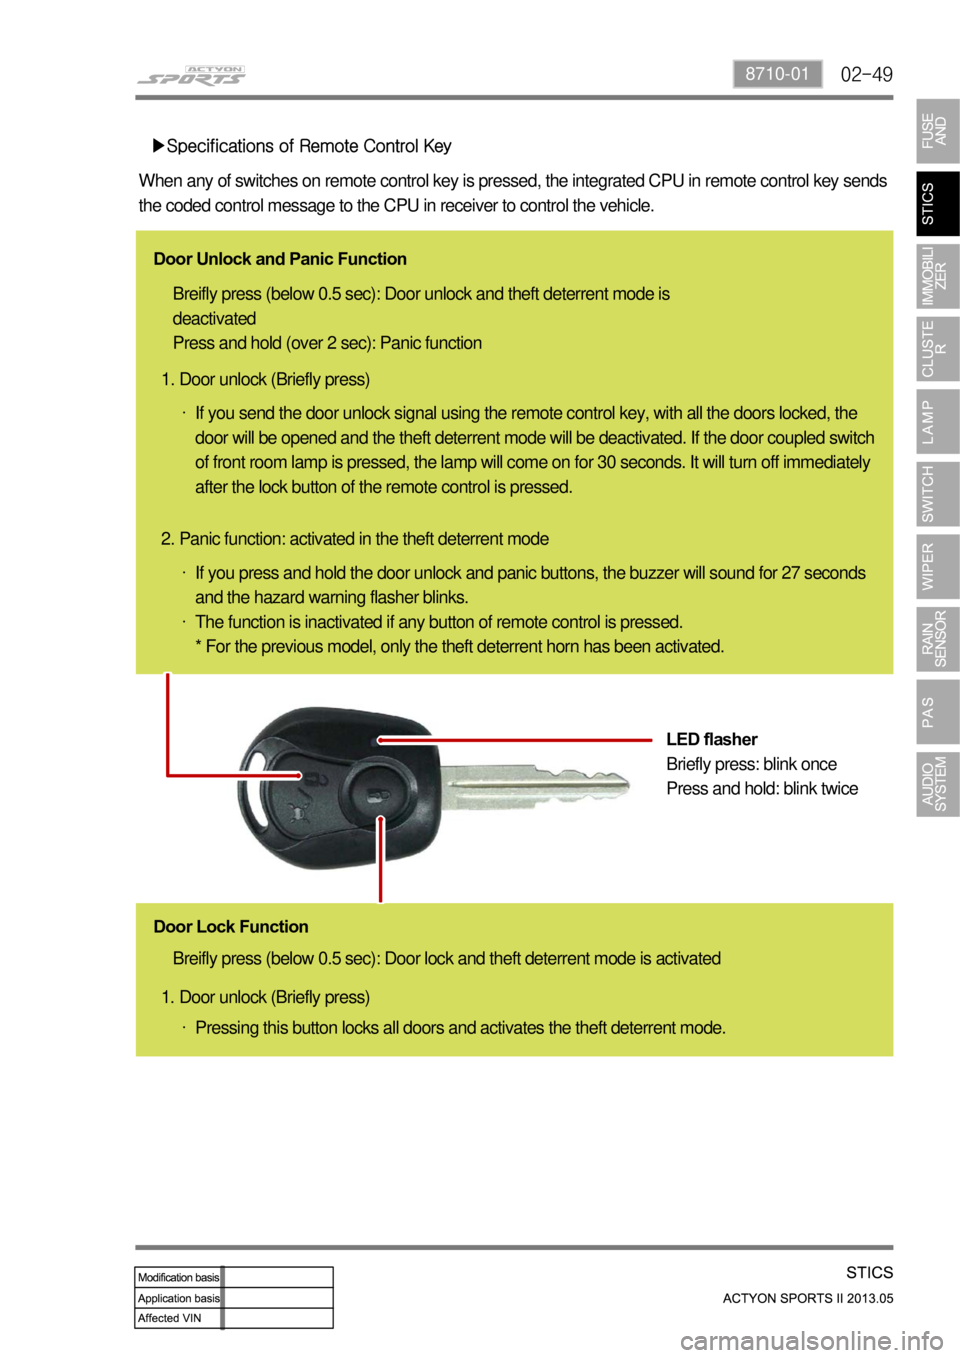 SSANGYONG NEW ACTYON SPORTS 2013  Service Manual 02-498710-01
▶Specifications of Remote Control Key
When any of switches on remote control key is pressed, the integrated CP\
U in remote control key sends 
the coded control message to the CPU in re